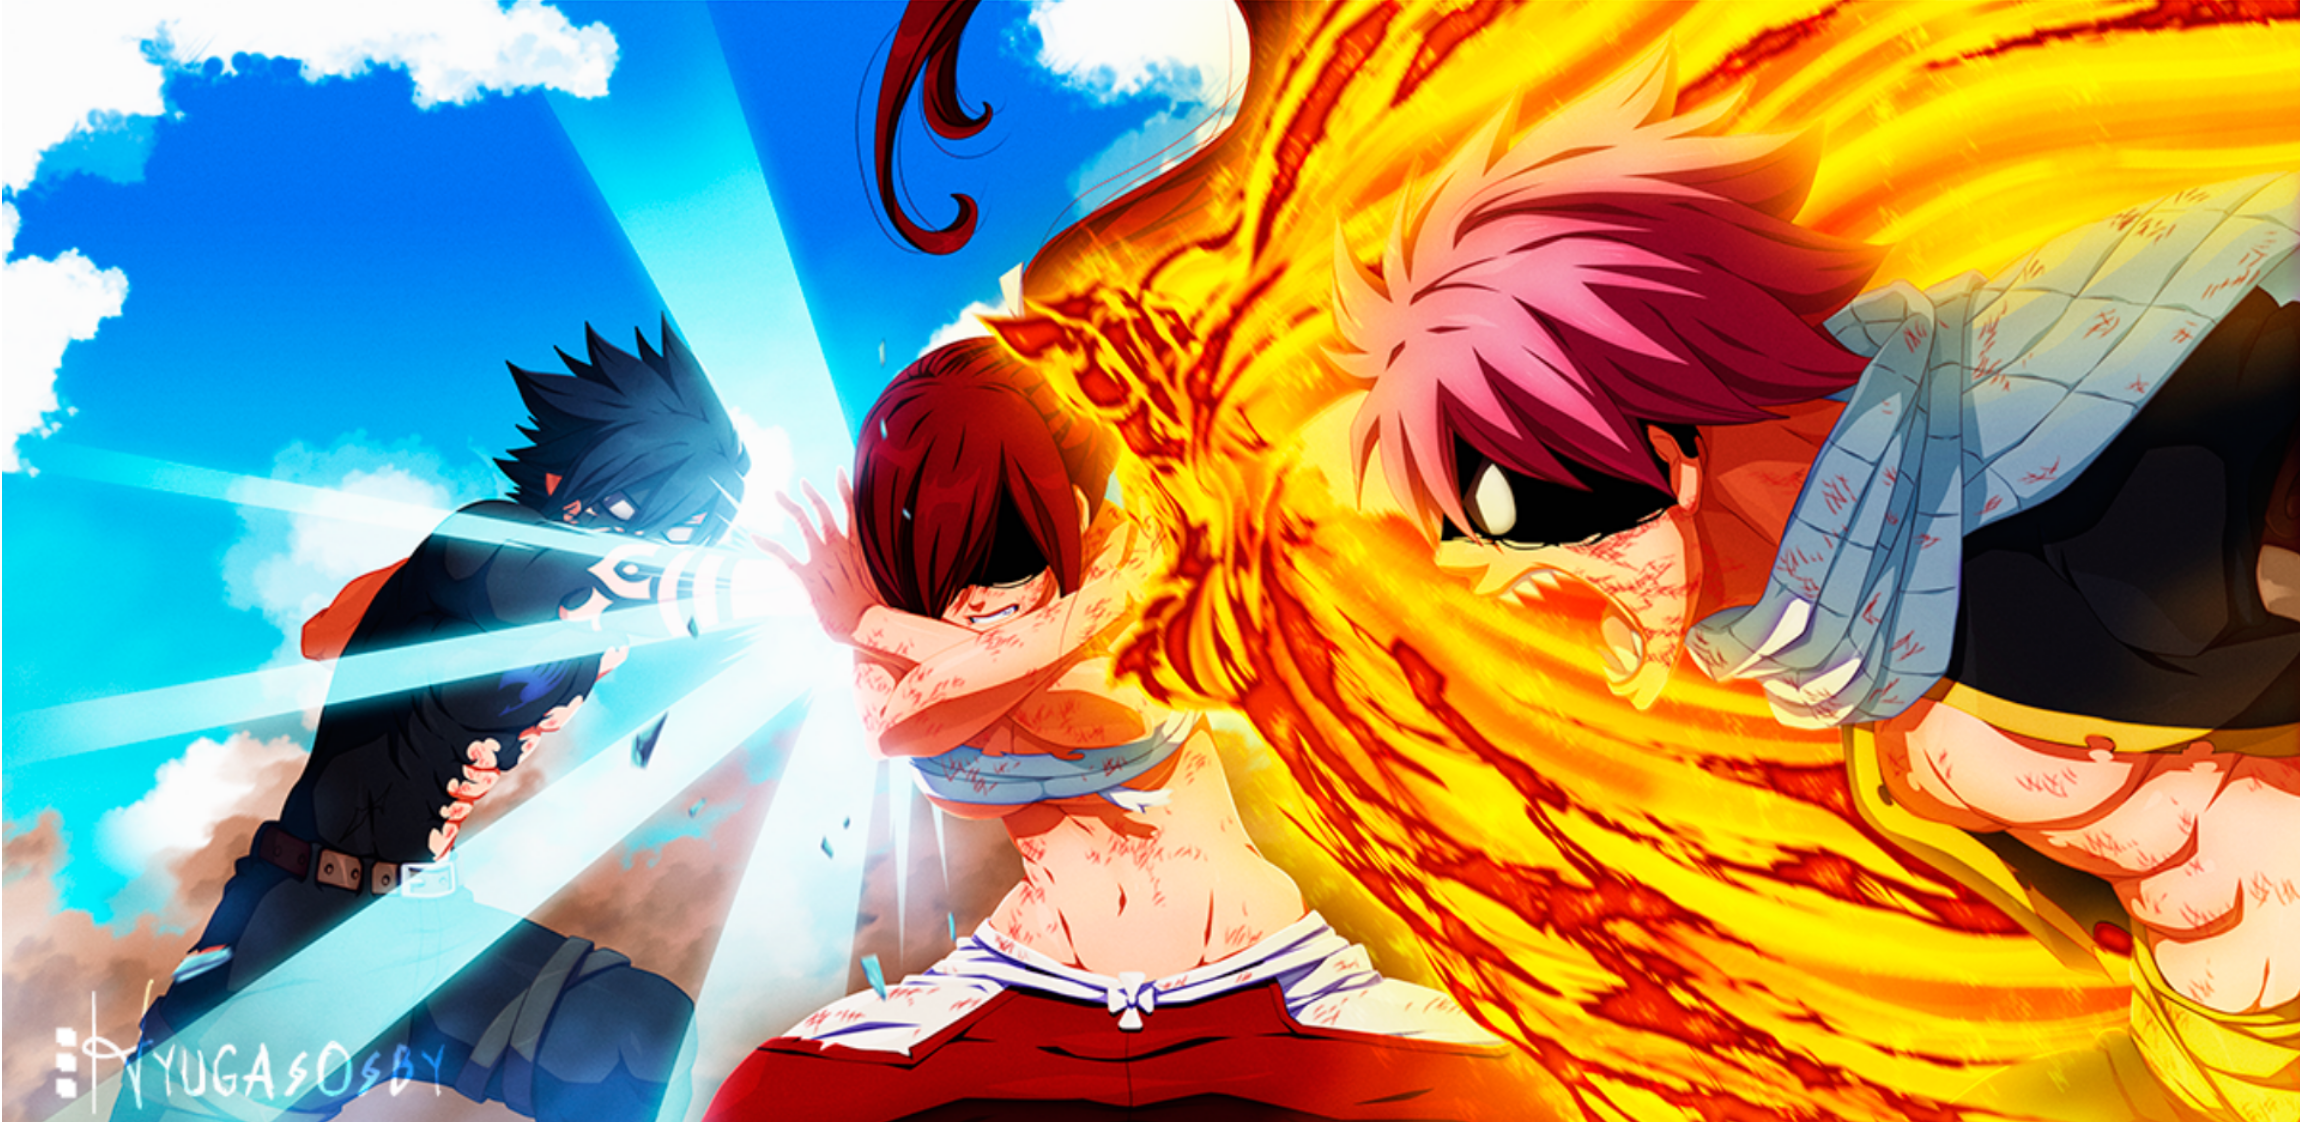 Fairy Tail HD Wallpaper | Background Image | 2300x1122 ...